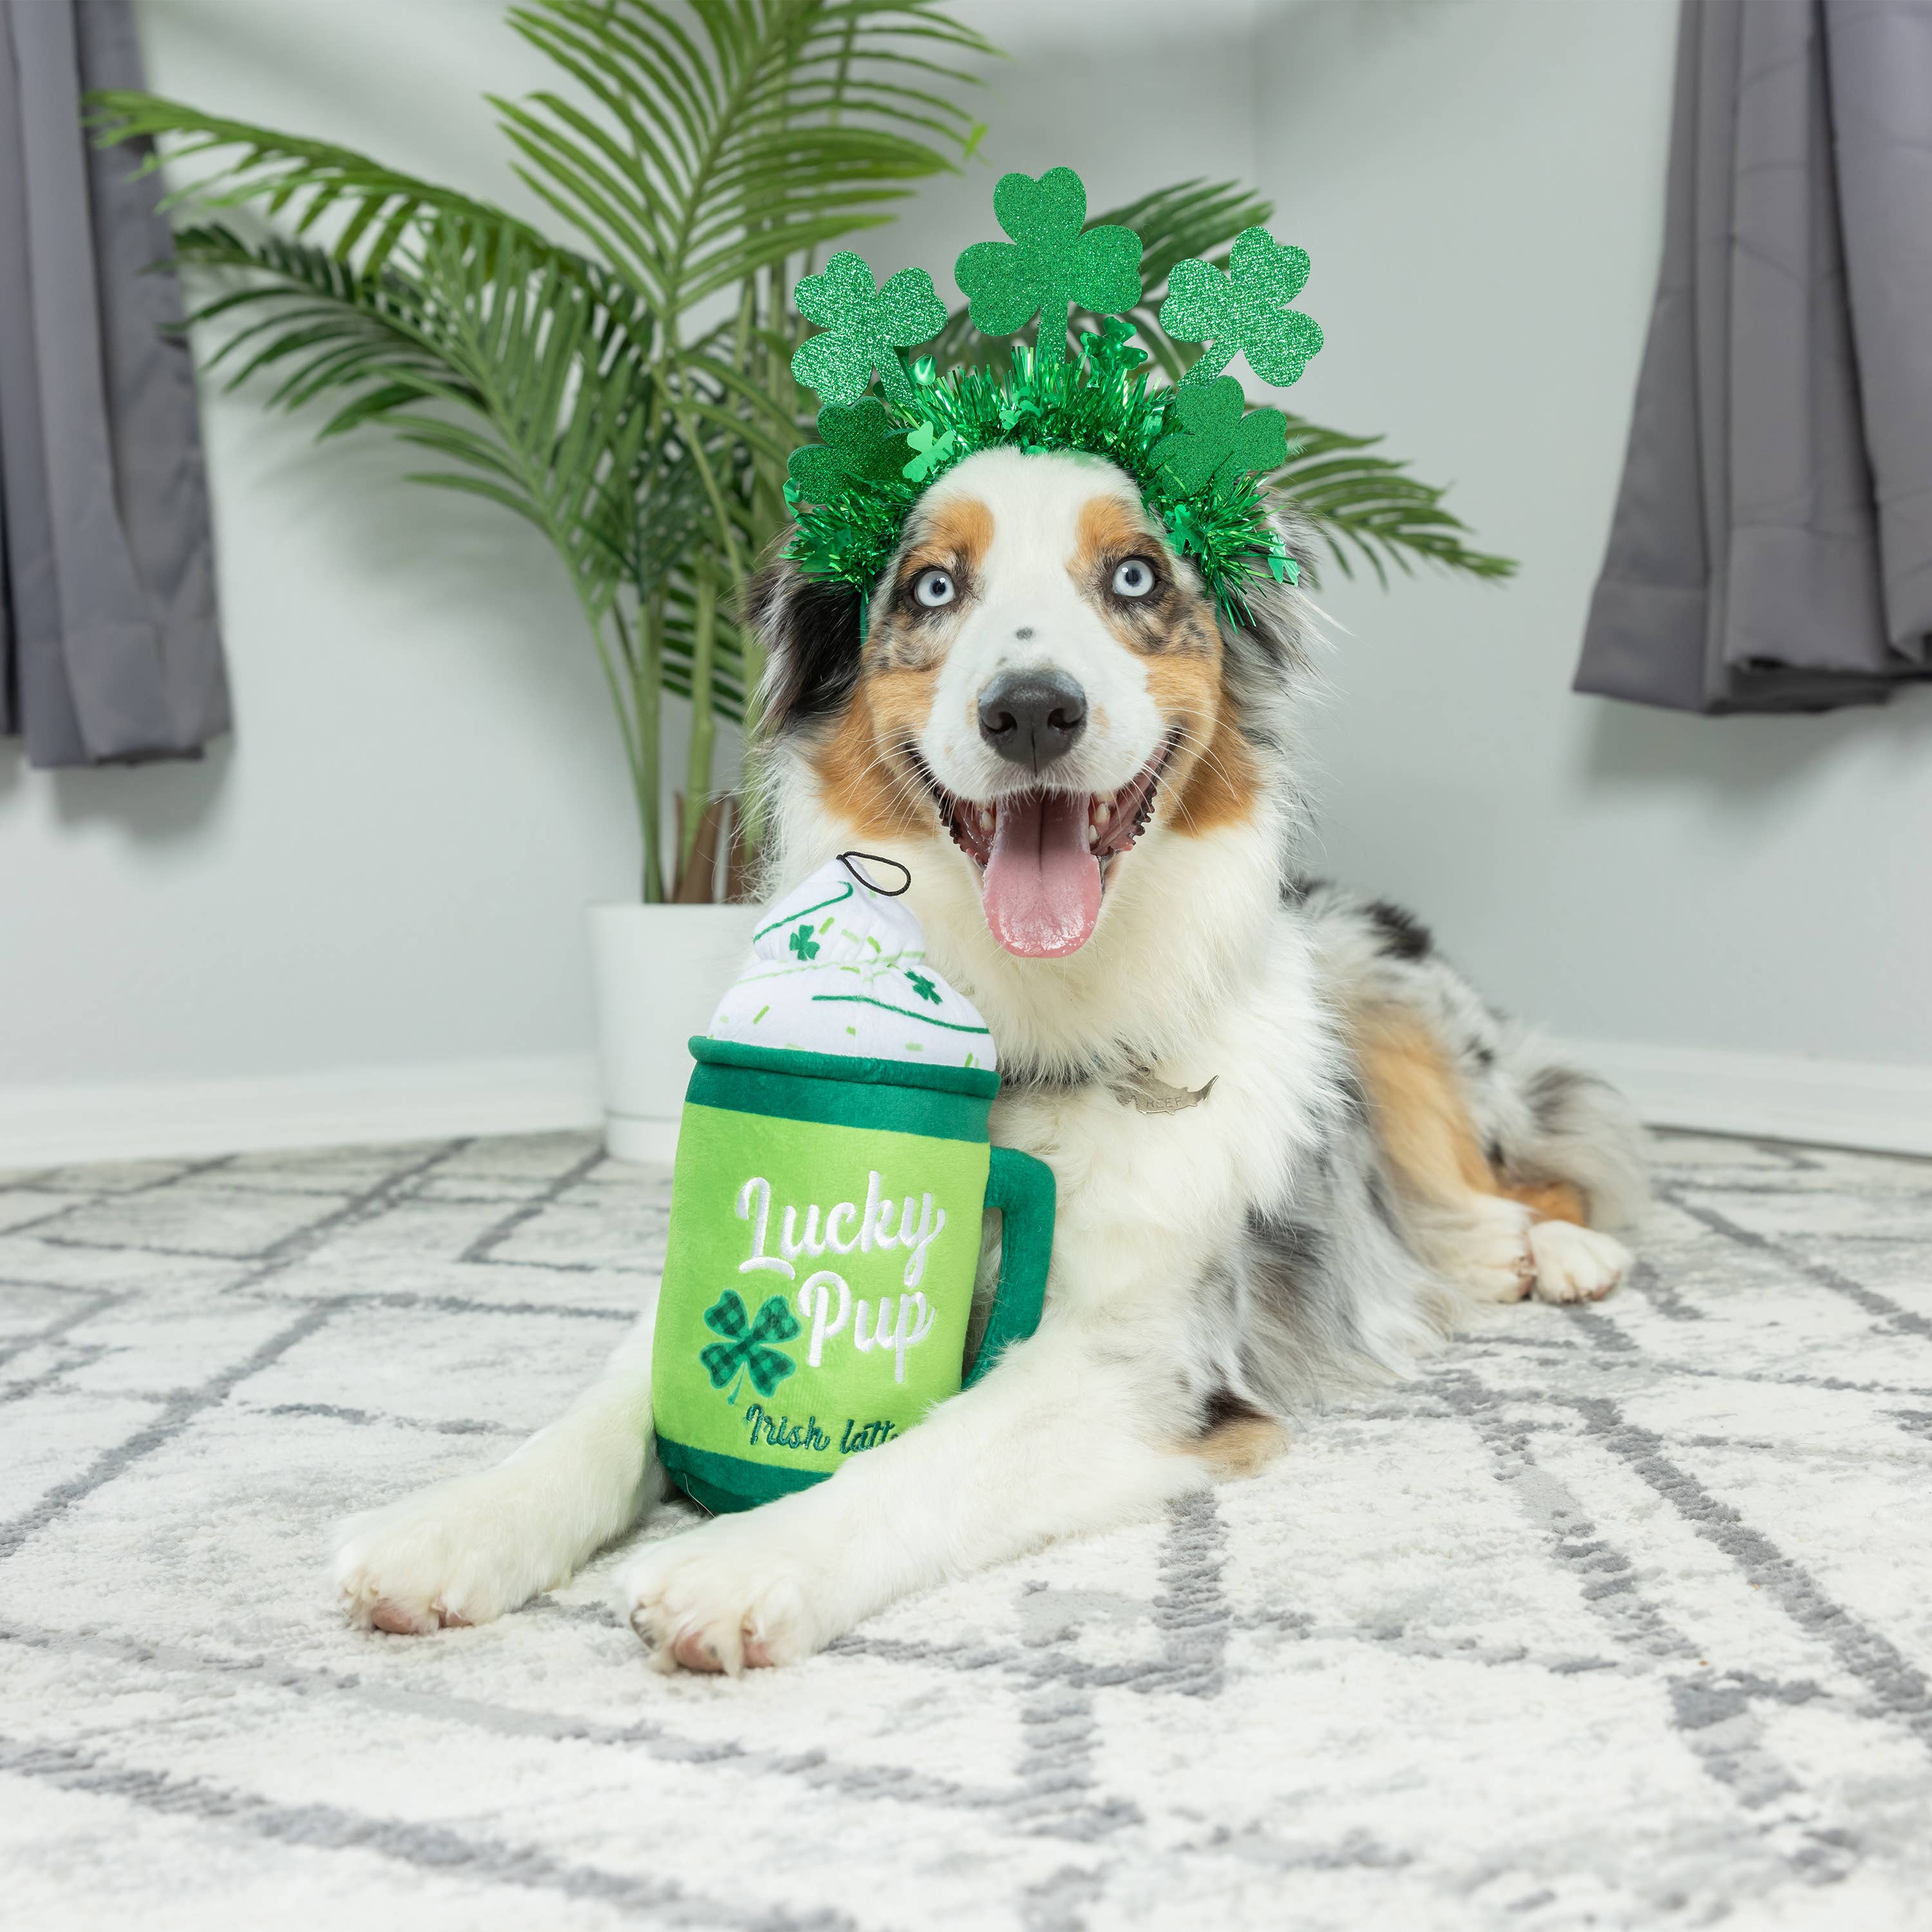 Lucky Pup Irish Latte For Dogs